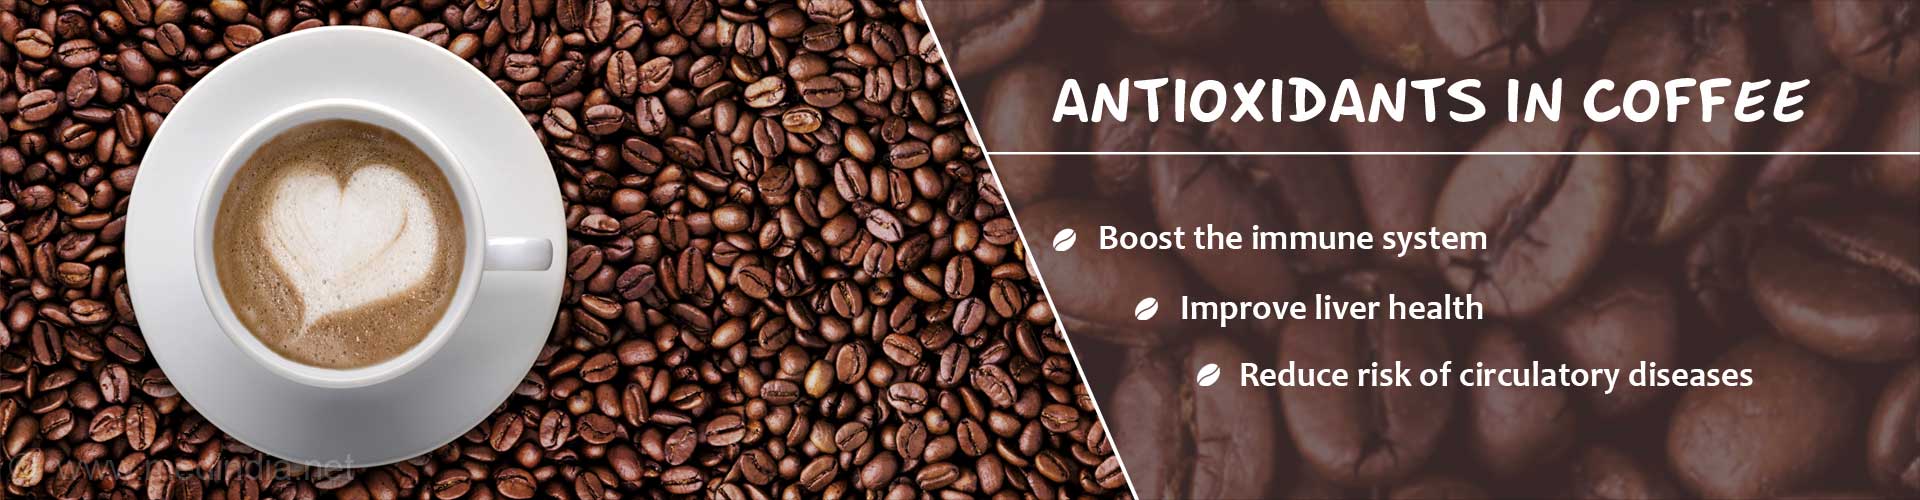 Antioxidants in coffee
- boost the immune system
- improve liver health
- reduce risk of circulatory diseases